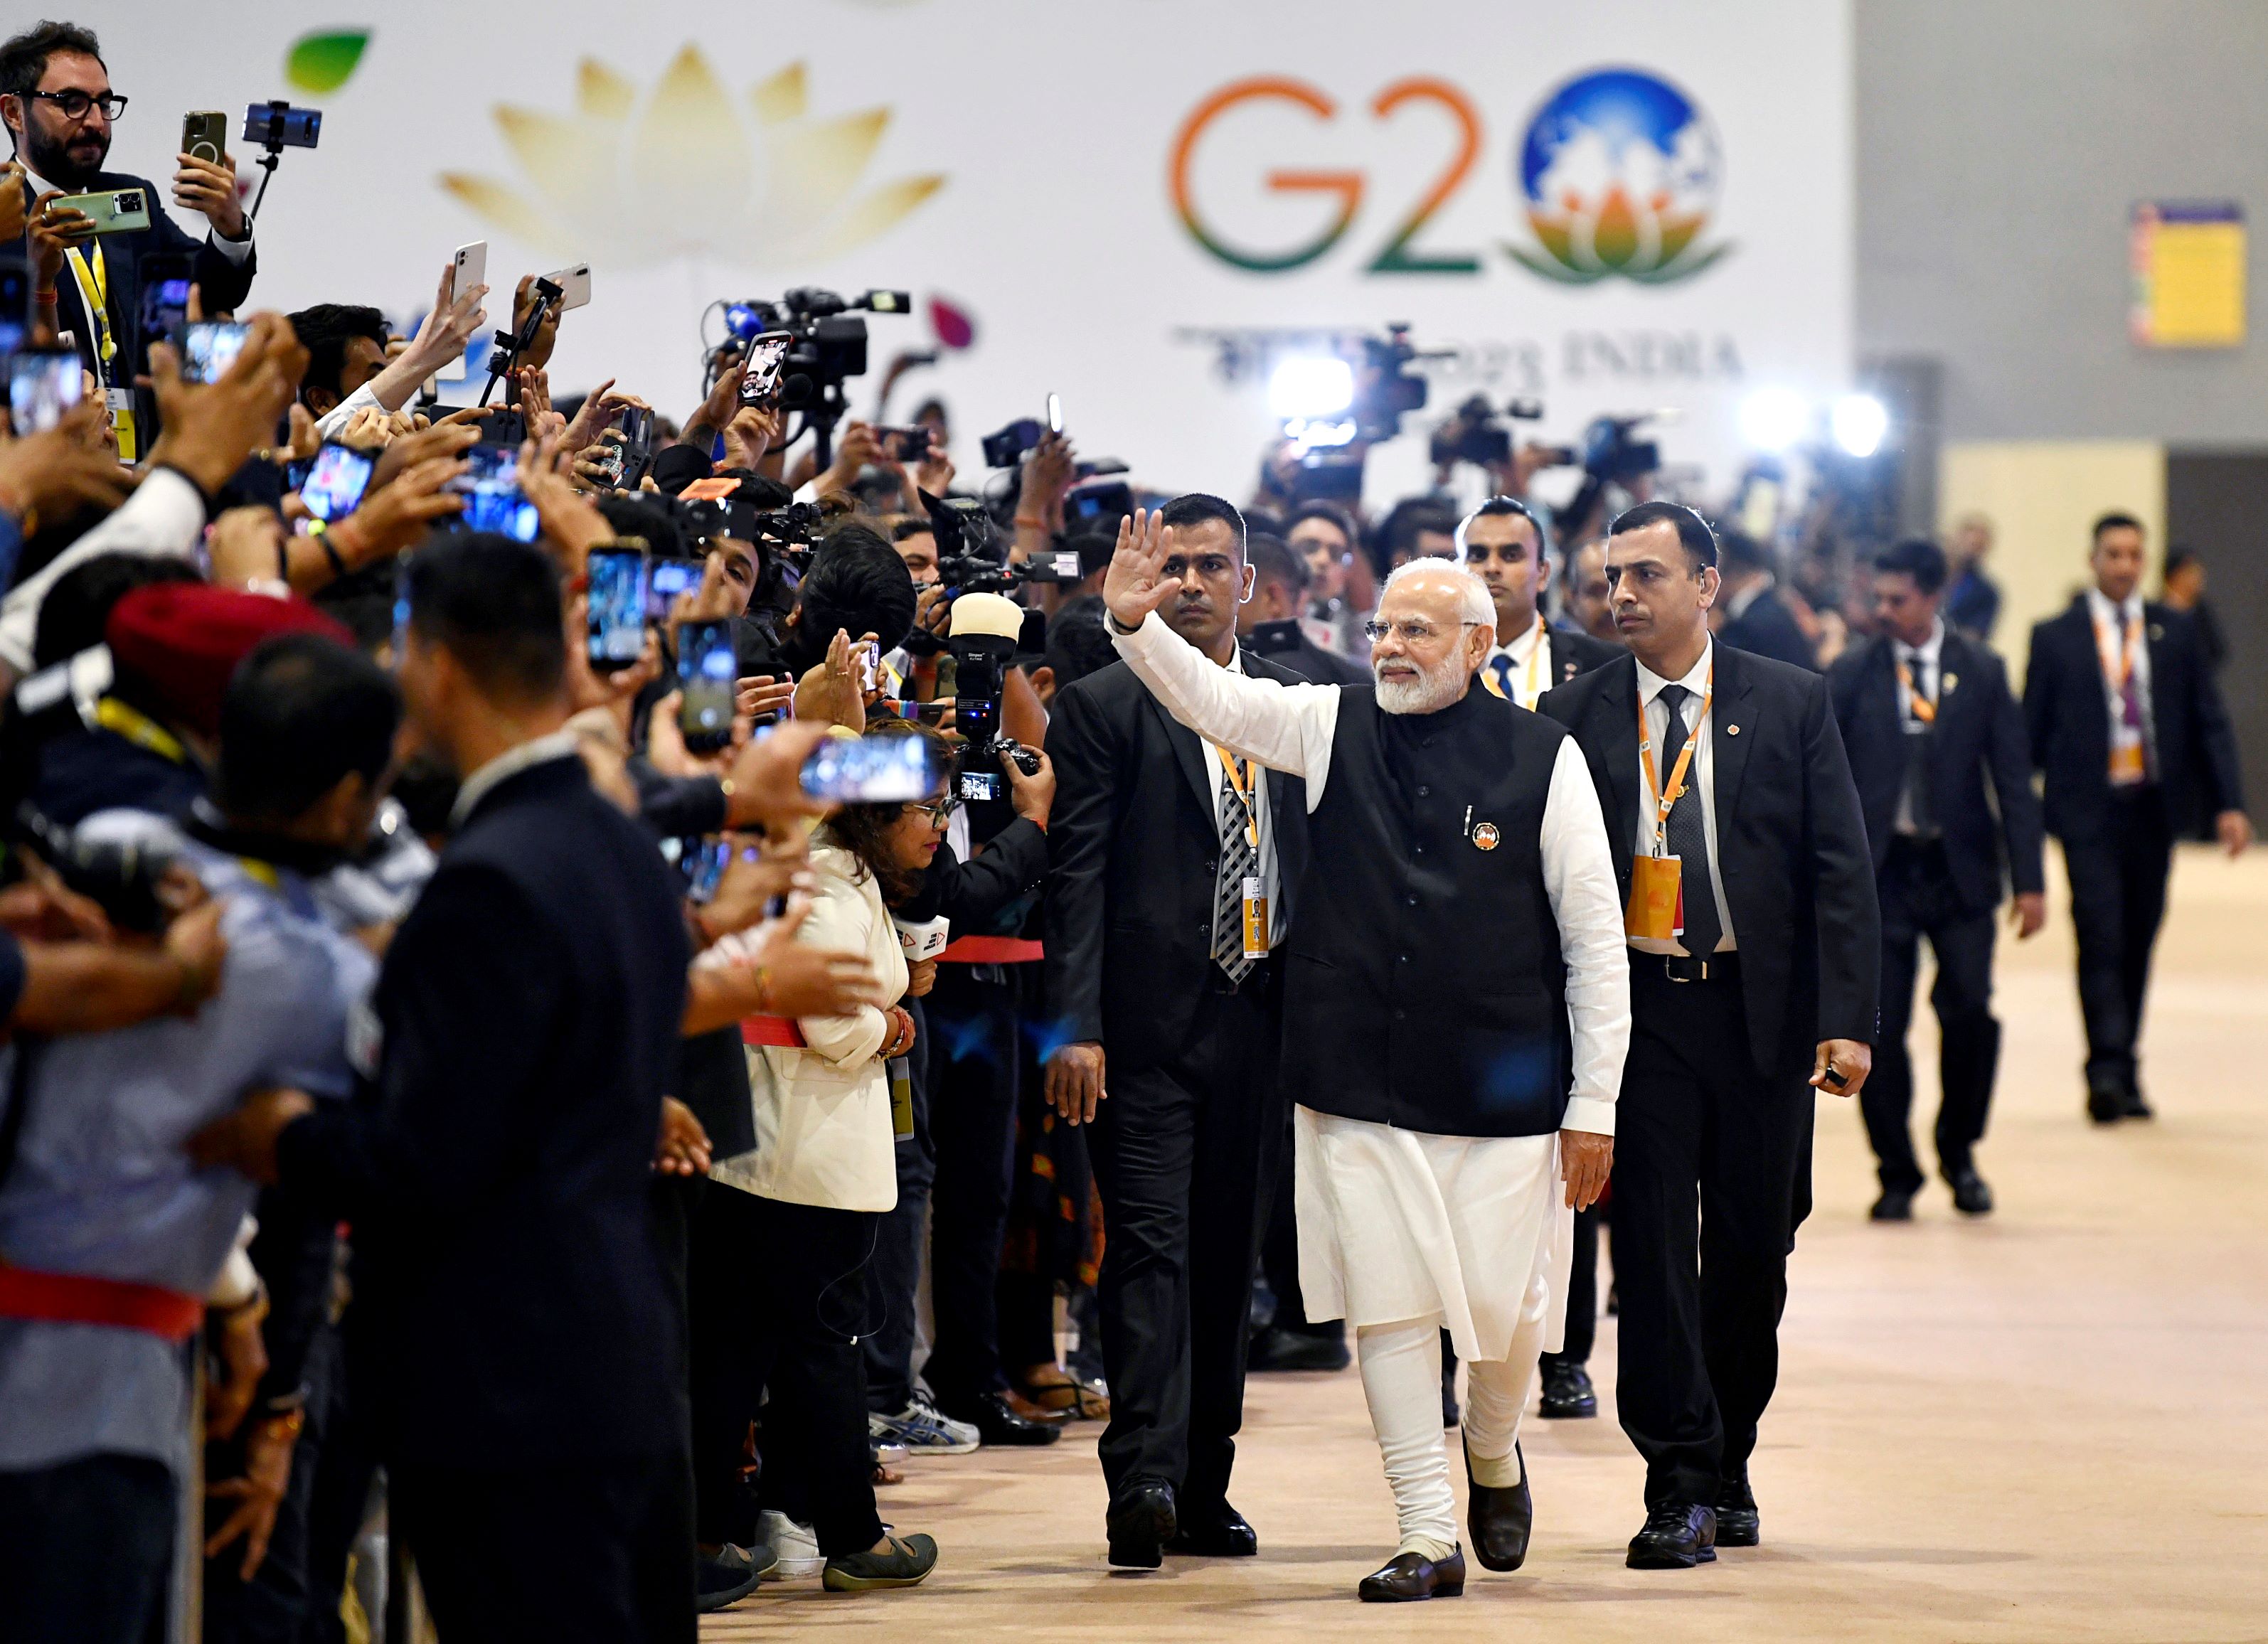 G20 Summit in India: TRIUMPH OF DIPLOMACY AND LEADERSHIP